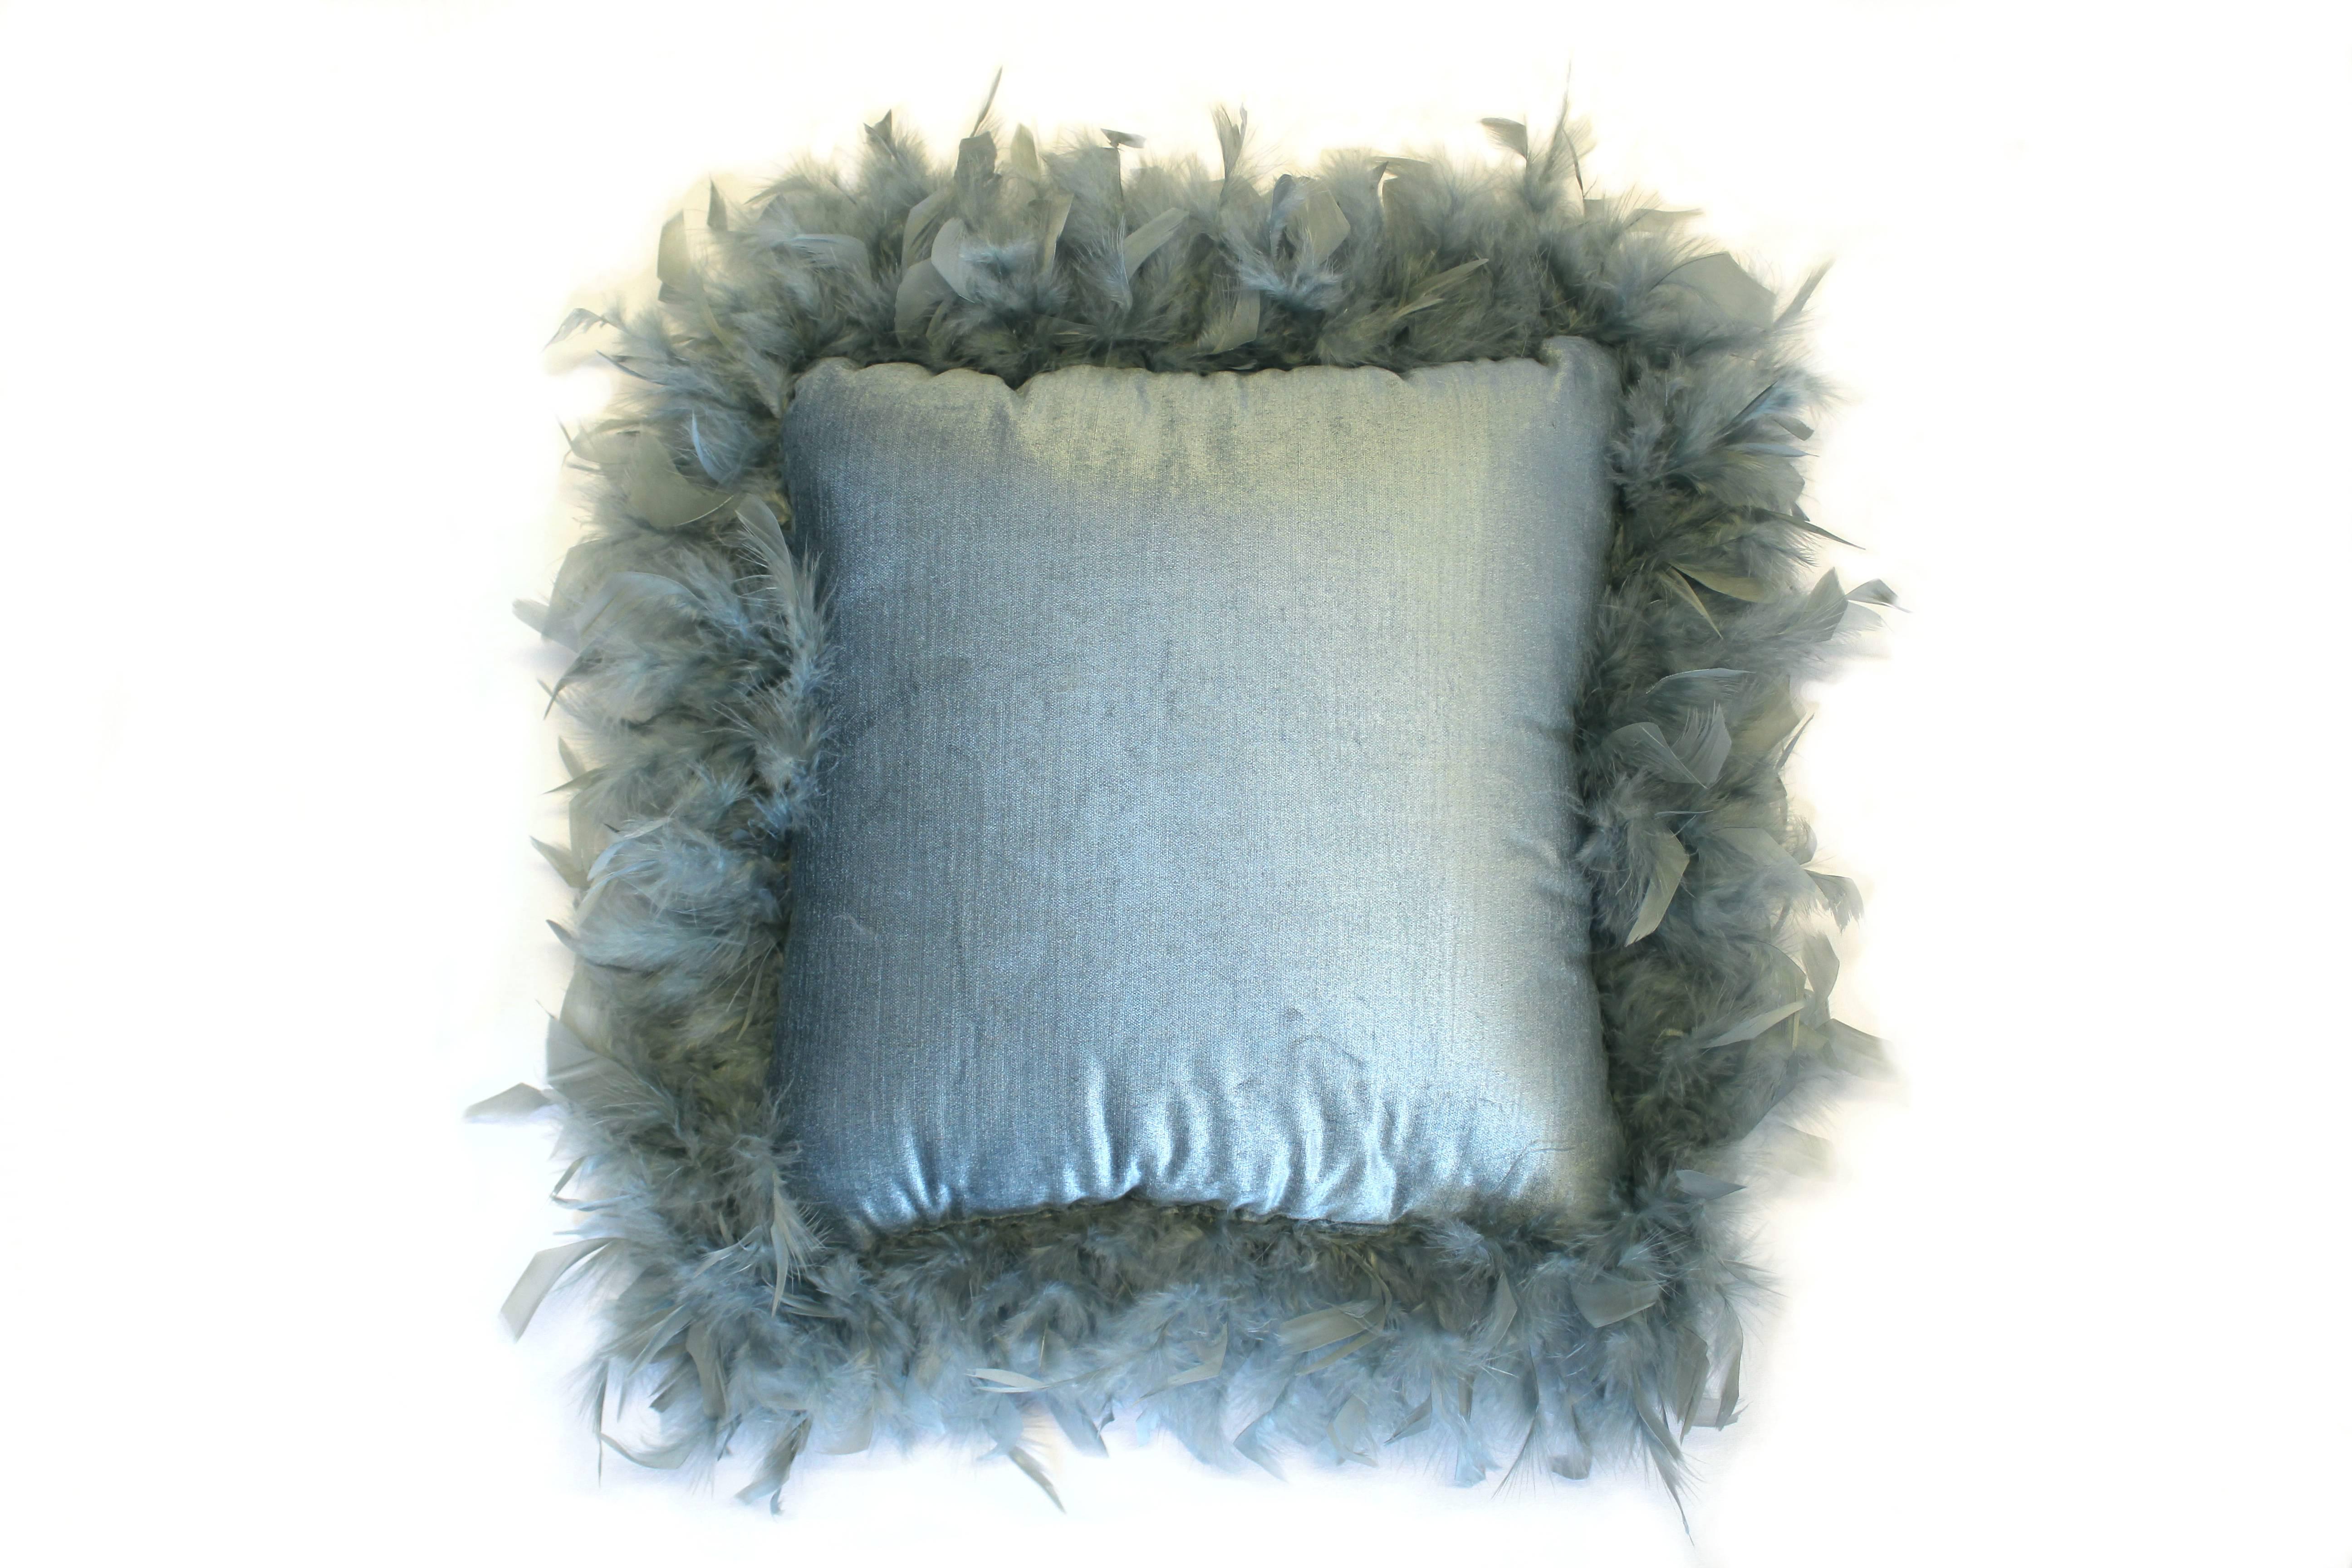 This pillow is a piece of art bei the award winning artist Claudia Fauth. It's handmade with printet fabric and feathers. Measurements: 19.69 x 19.69 in ( 50 x 50 cm )